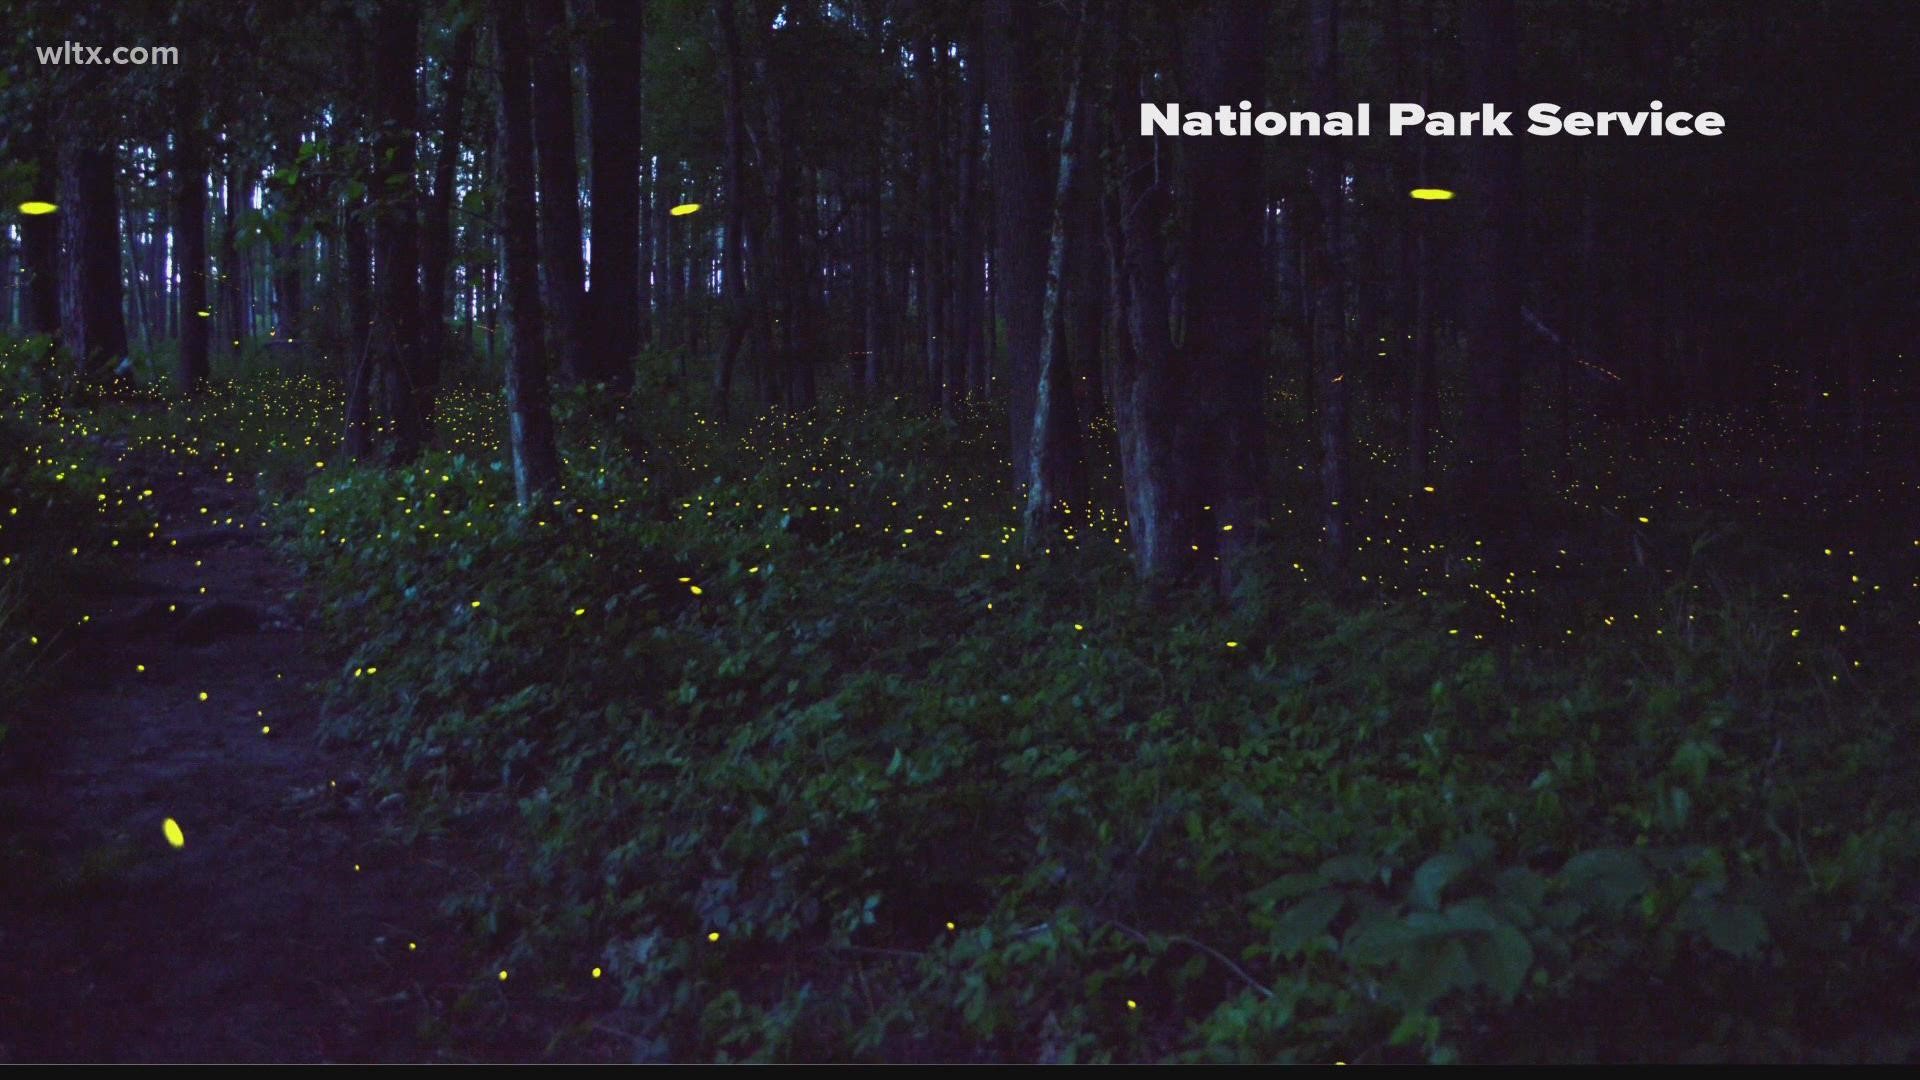 Every year, fireflies put on a spectacular show where they synchronize their nighttime glow.